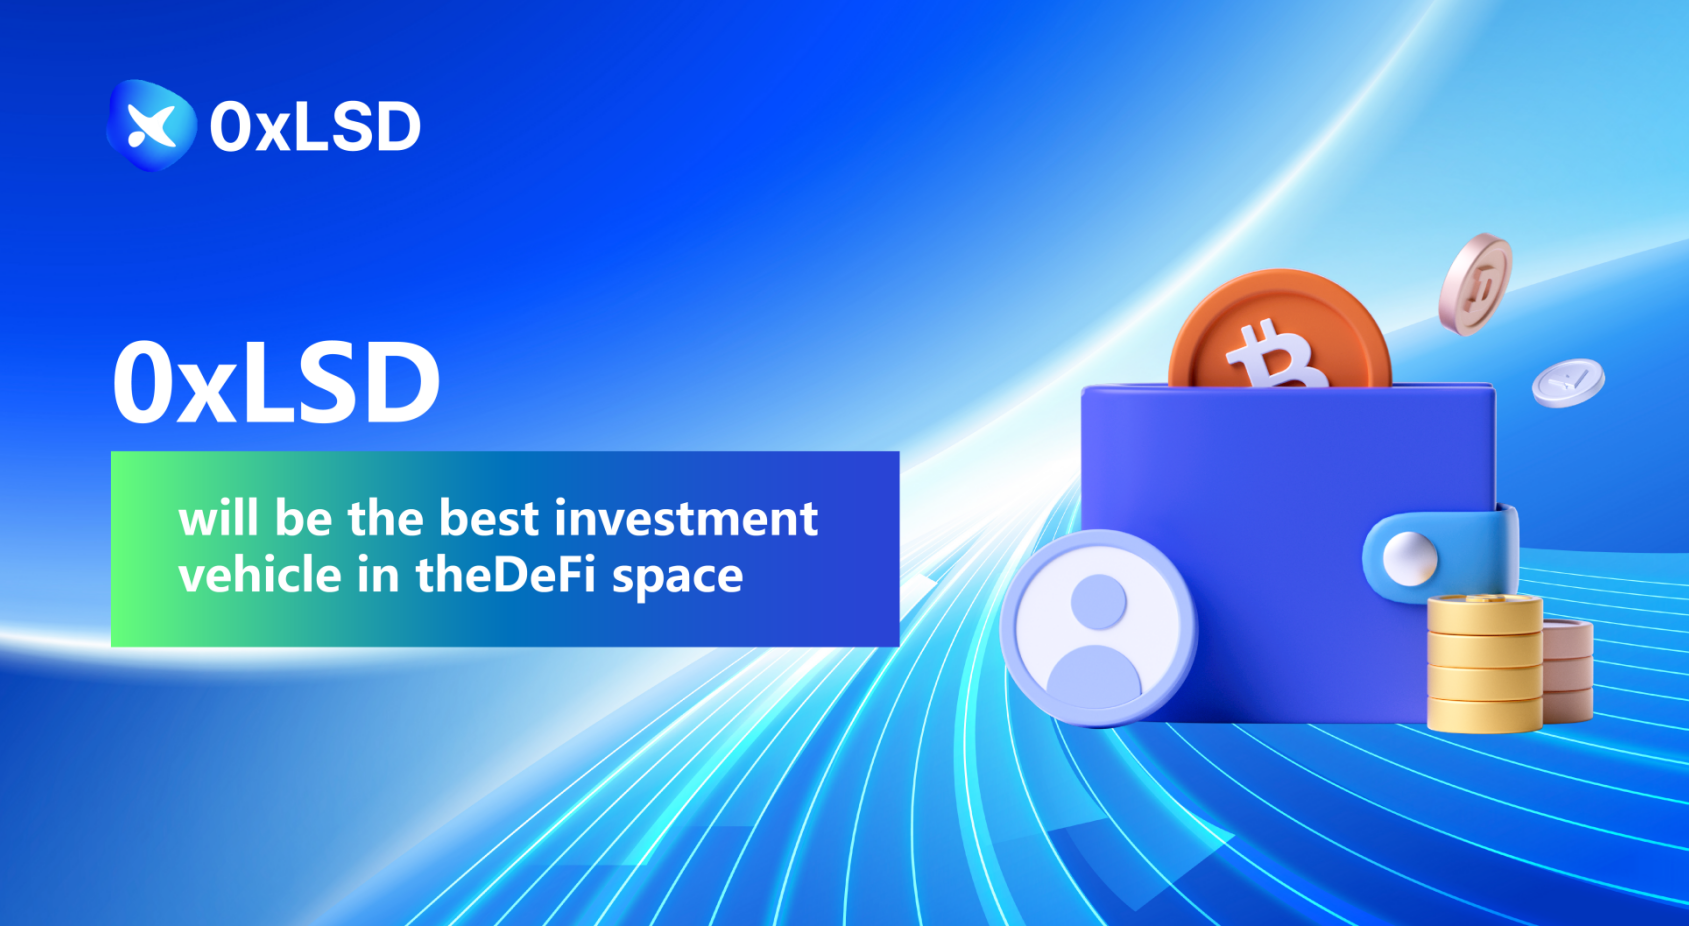 DeFi Yield Slumps, 0xLSD Emerges as the Best Investment Tool